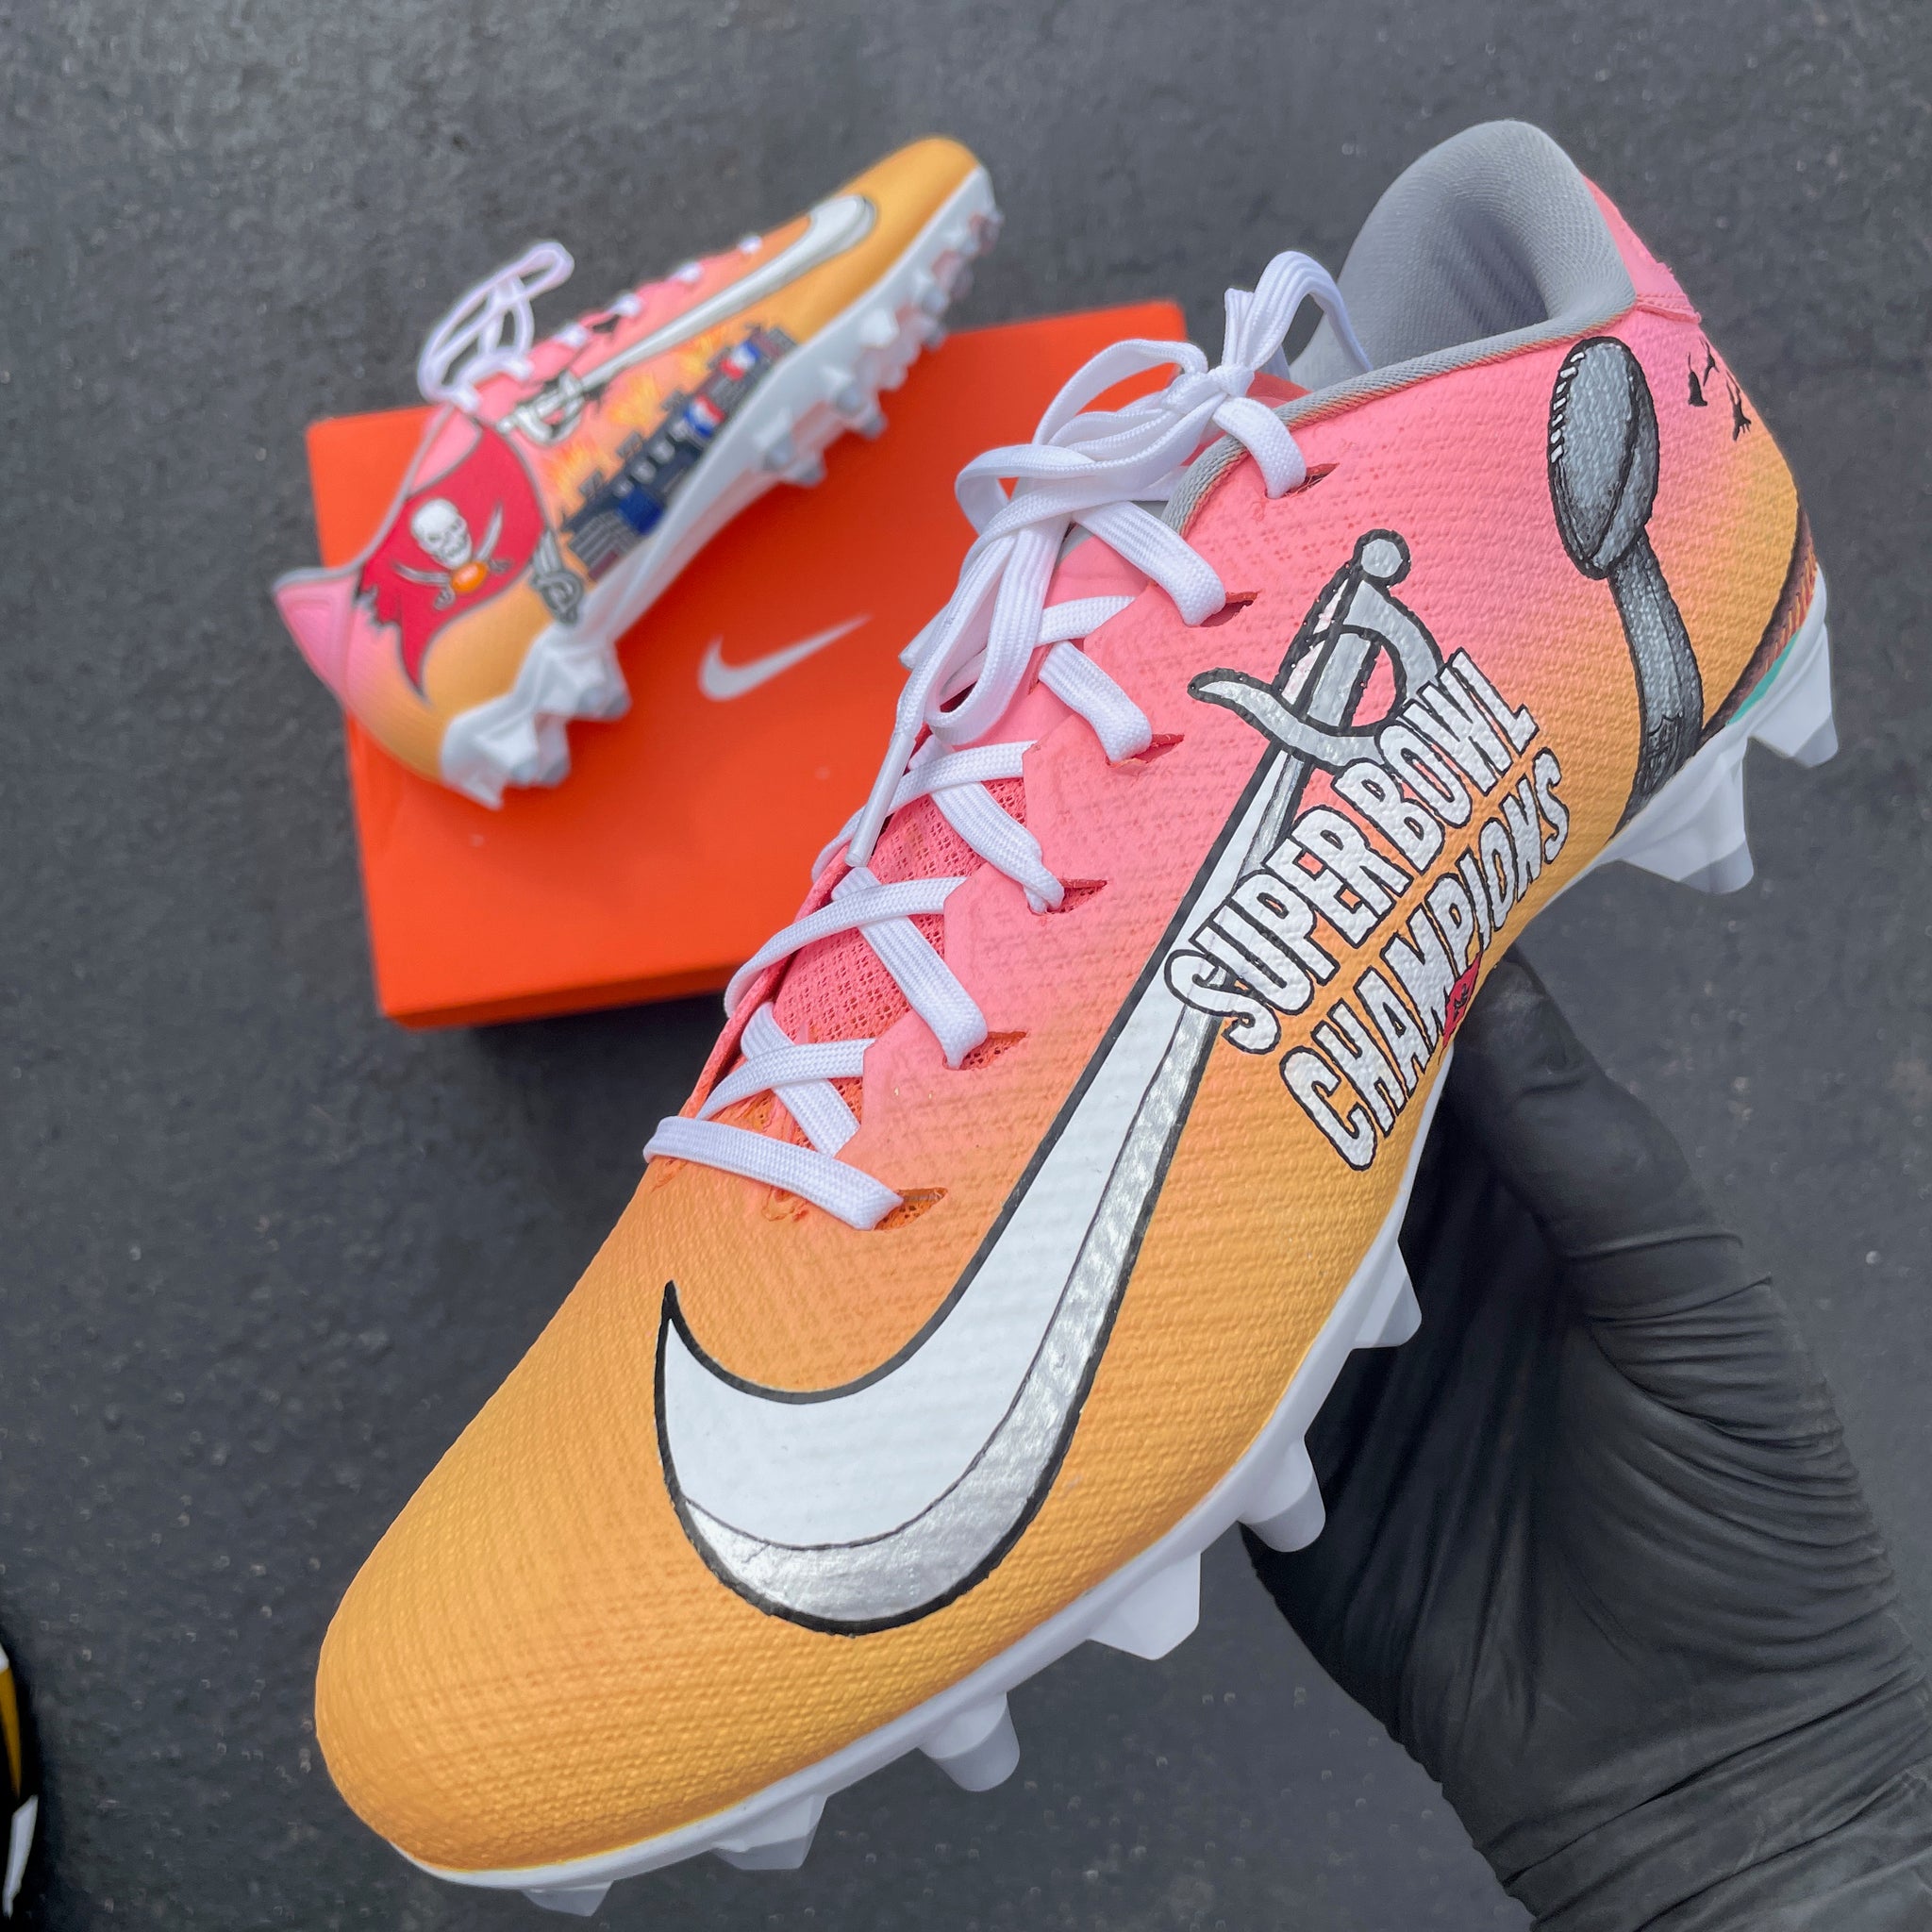 Custom Nike Cleats In Men's Football Shoes & Cleats for sale